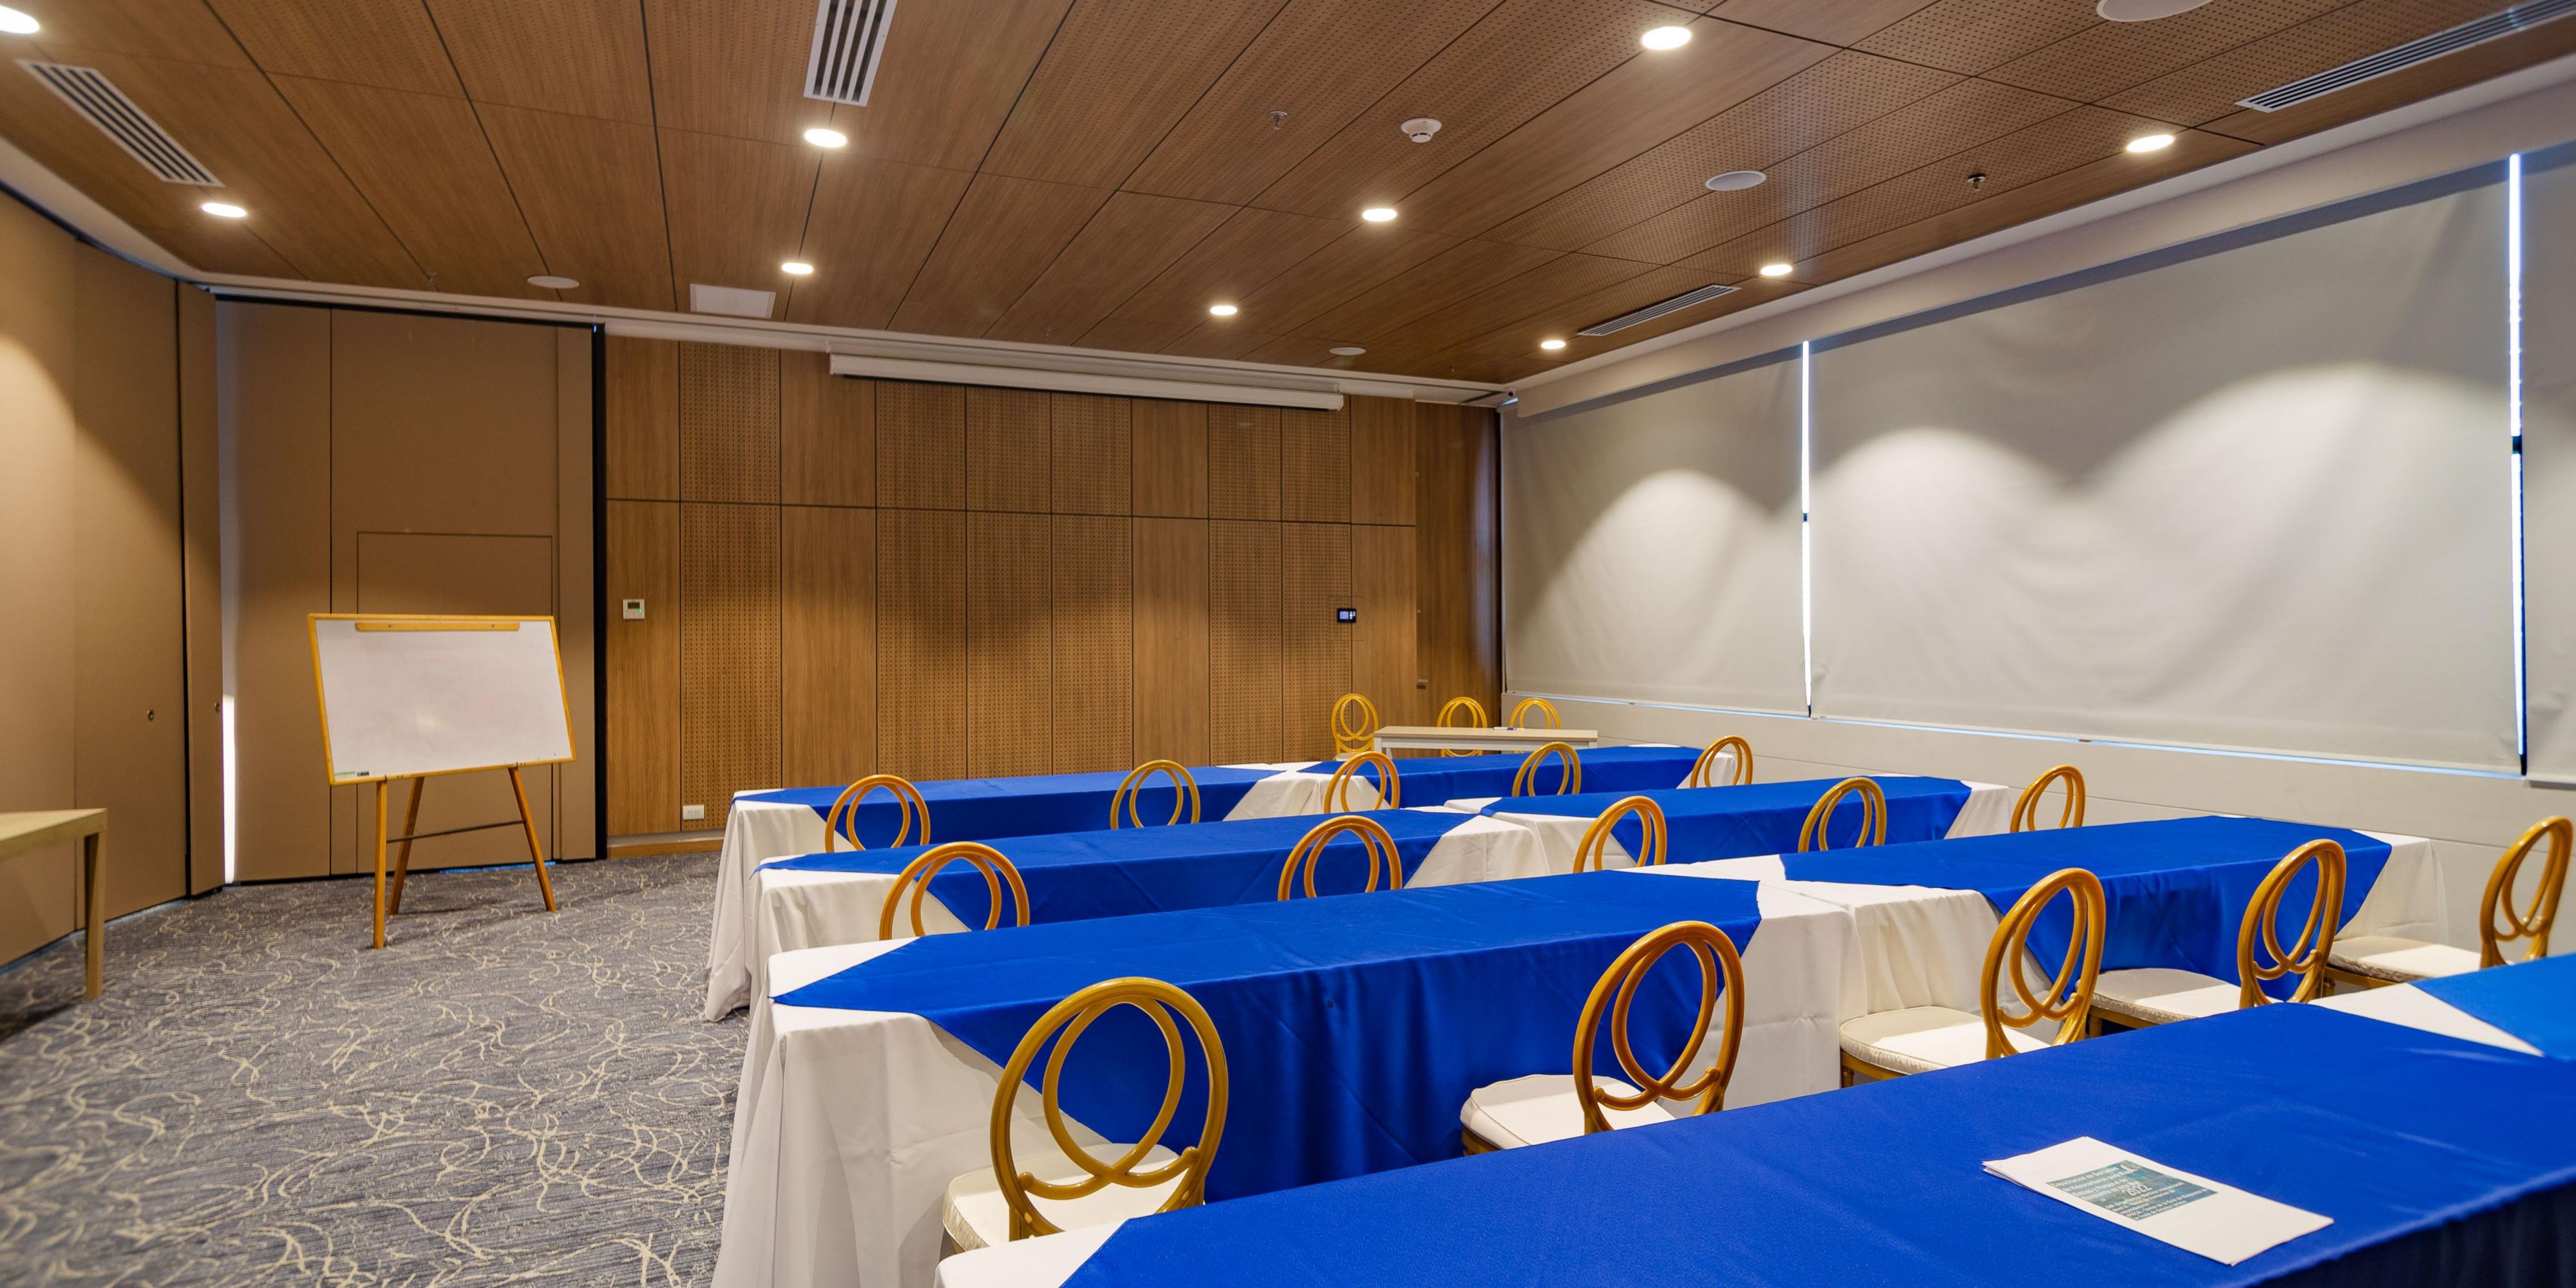 We have two meeting rooms with capacity of 90 people each, and one big room for 180 people. We offer A&B service.